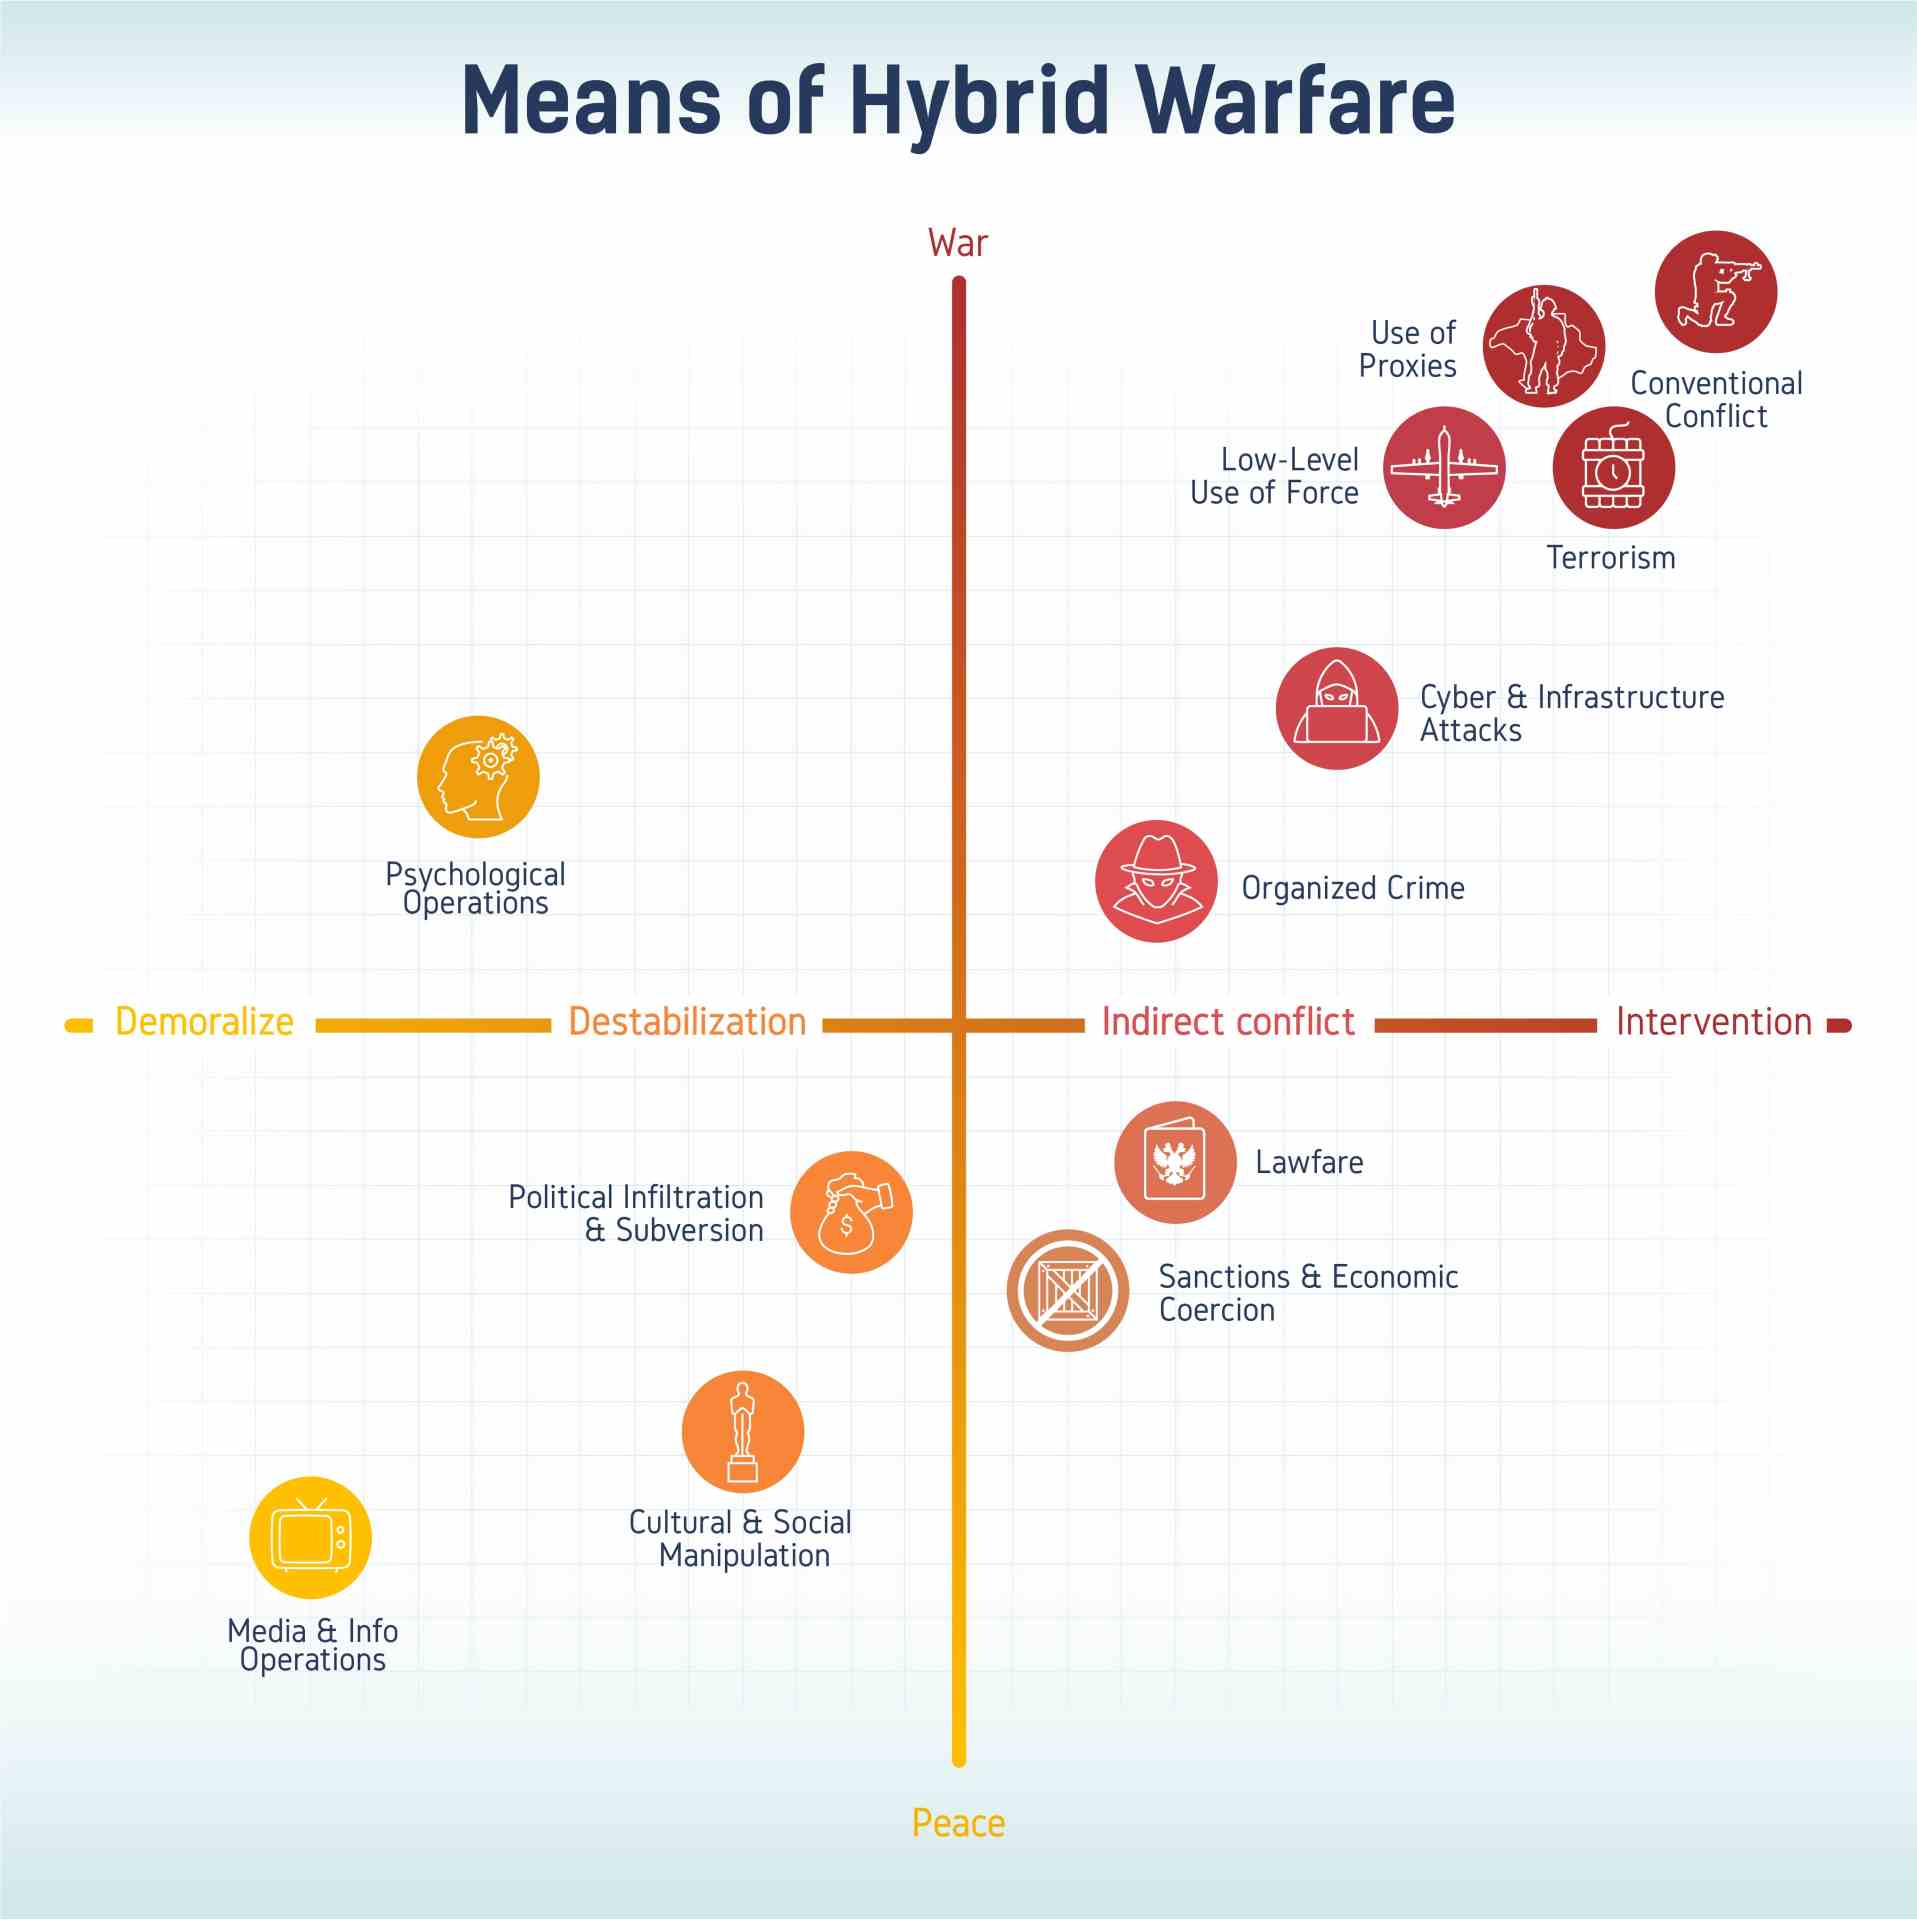 Means of Hybrid Warfare infographic